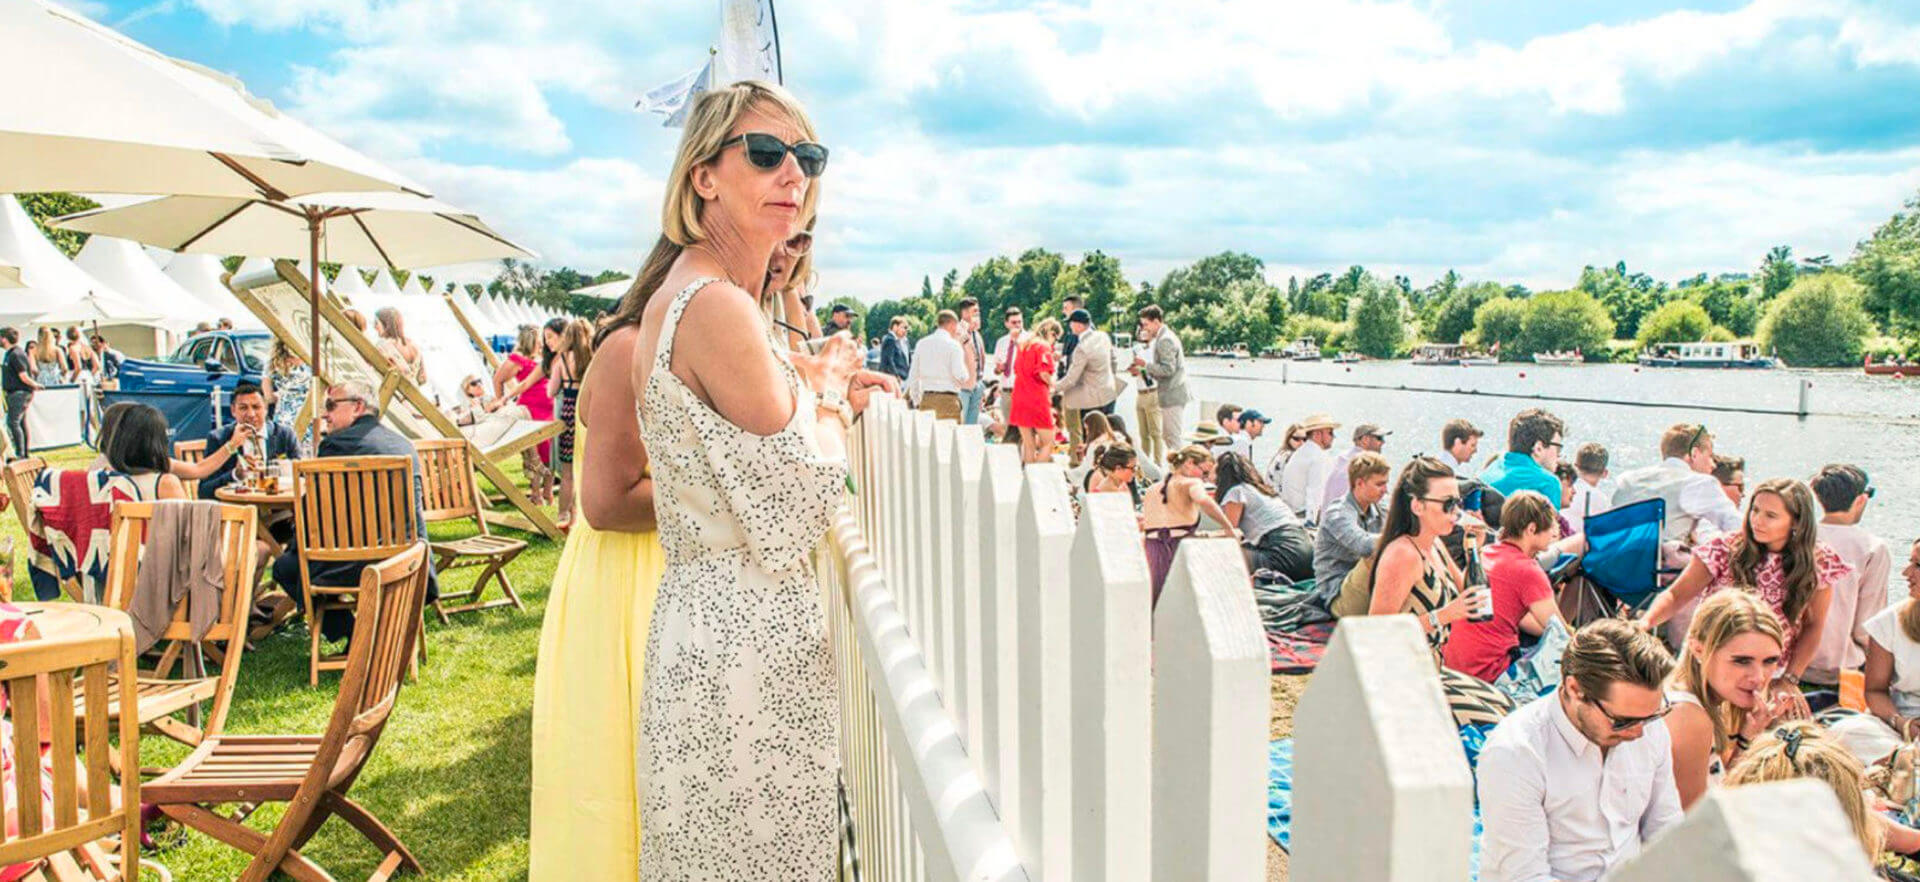 Luxuria Lifestyle is thrilled to be visiting the Legendary Chinawhite party that returns to Henley for 2022